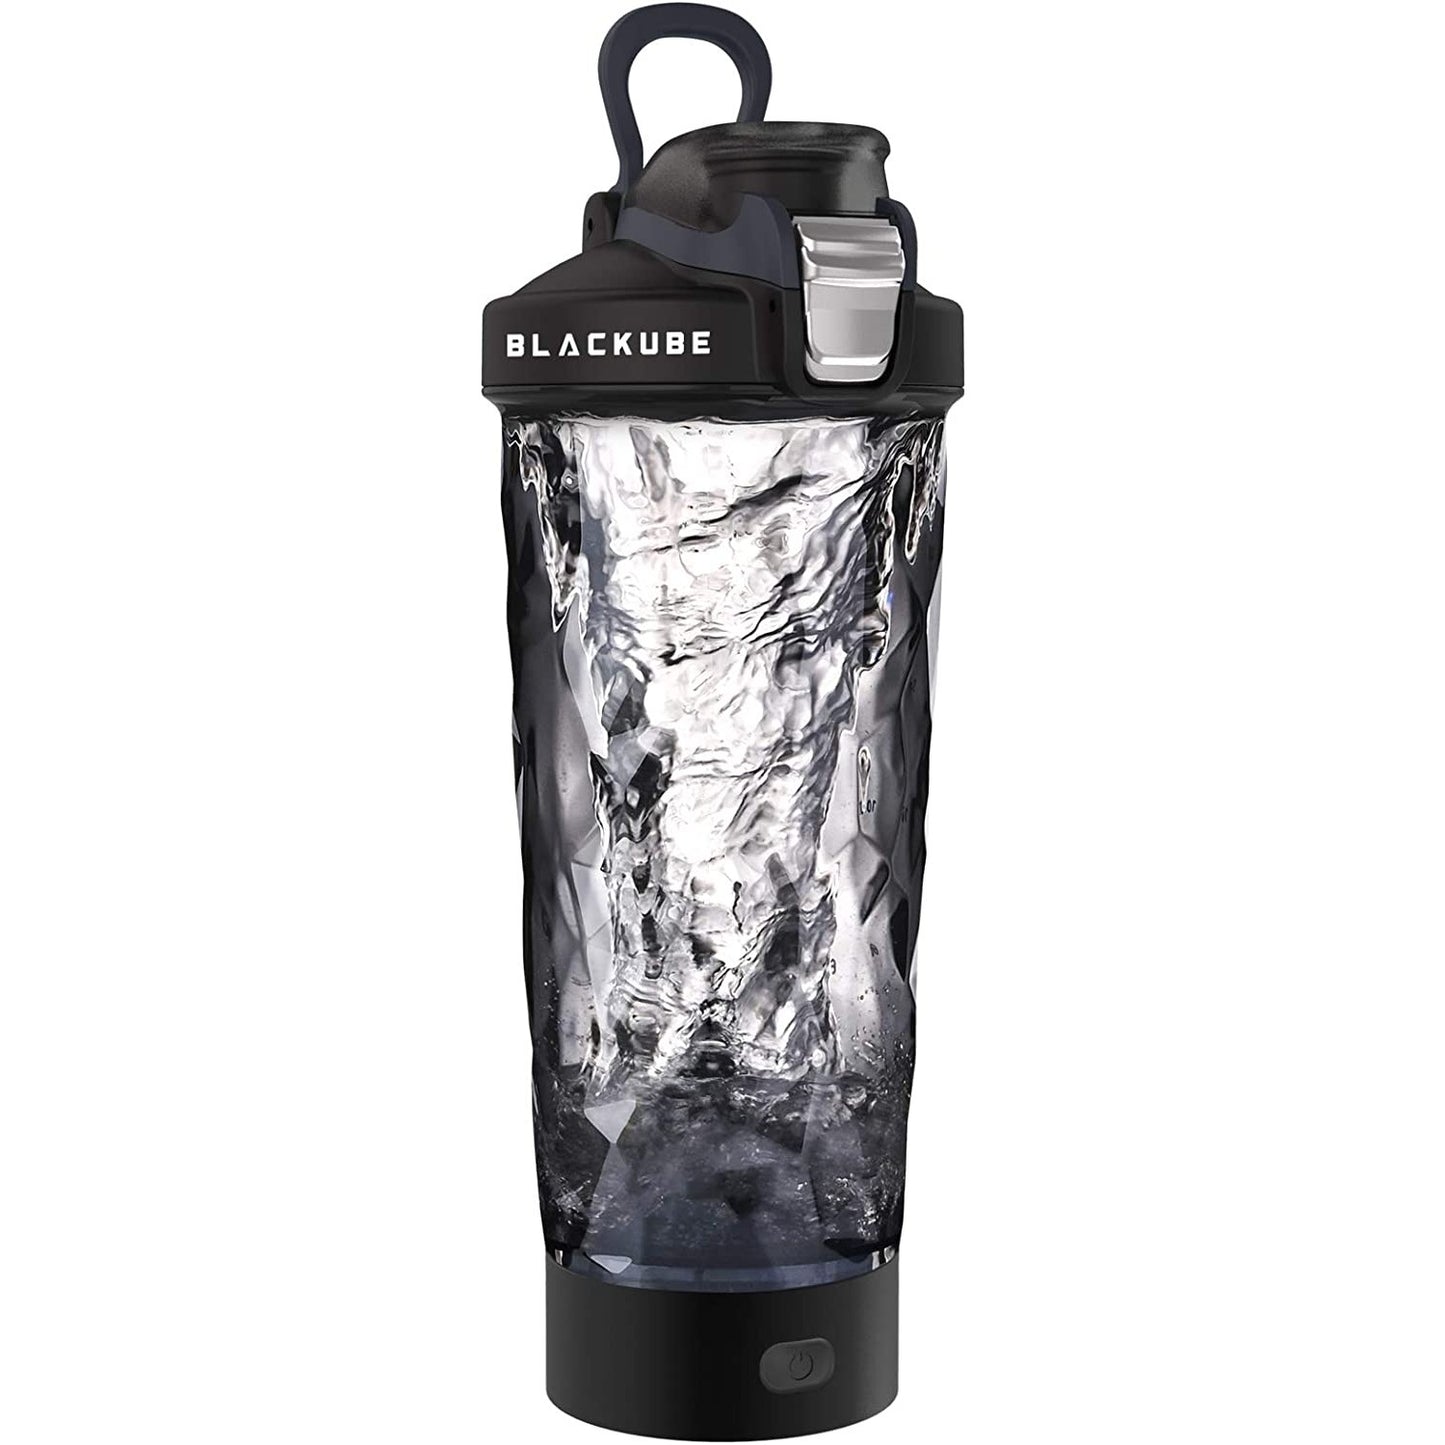 A black colored rechargeable protein shaker bottle with water being swirled around inside the clear container.